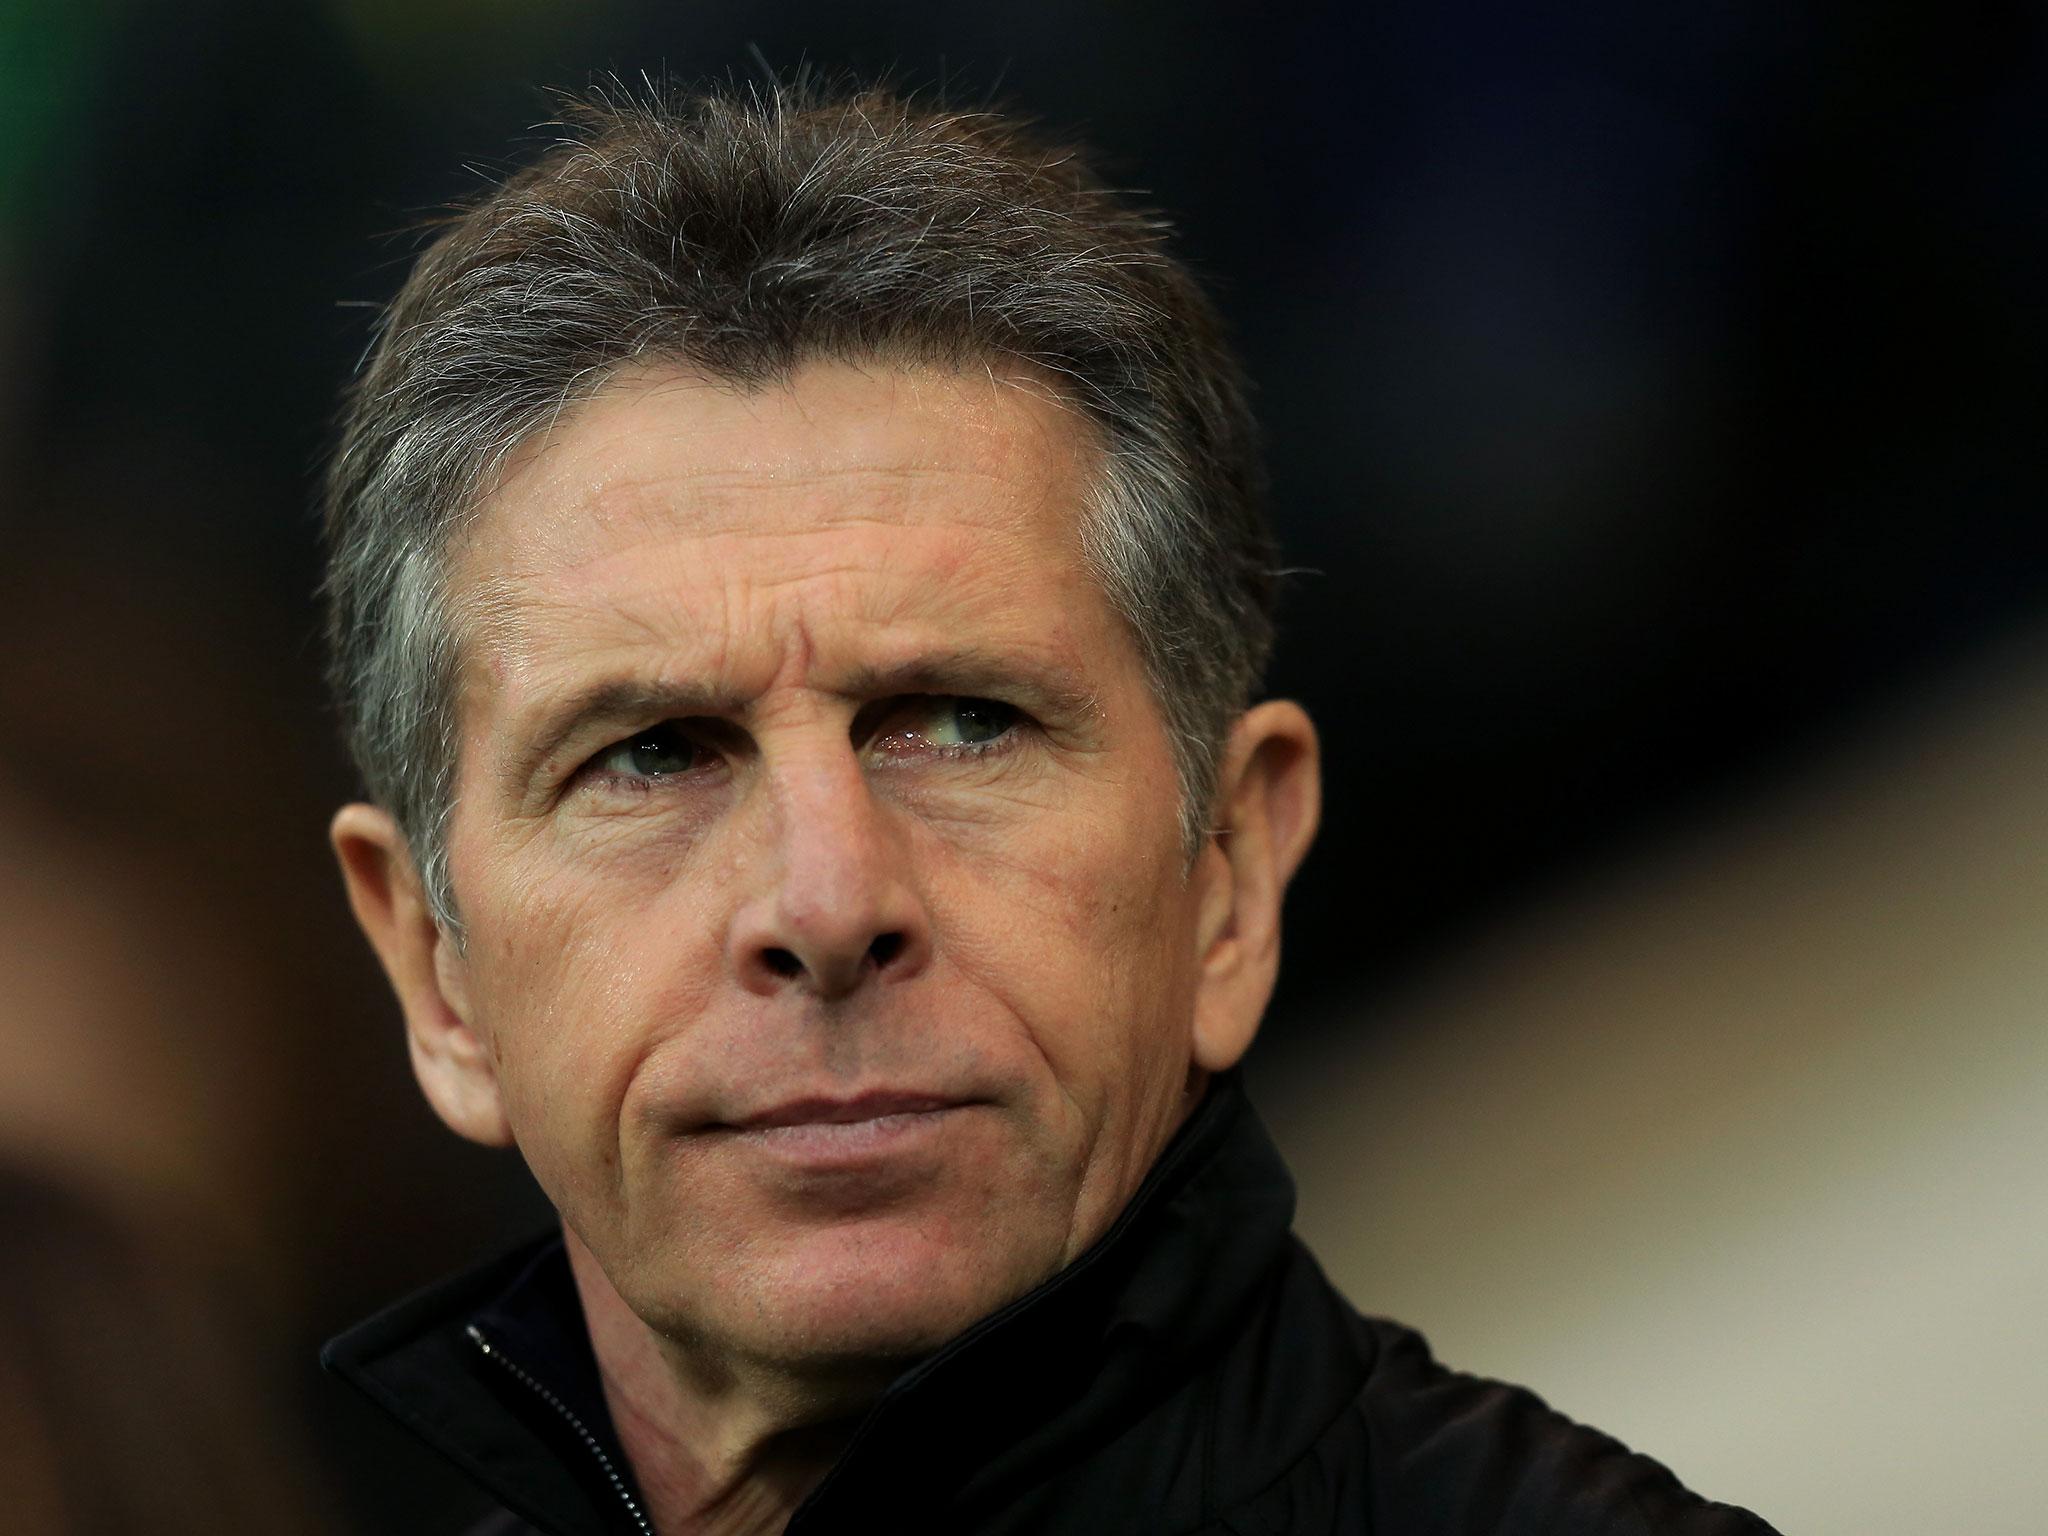 Claude Puel lasted just one season in the Southampton dugout